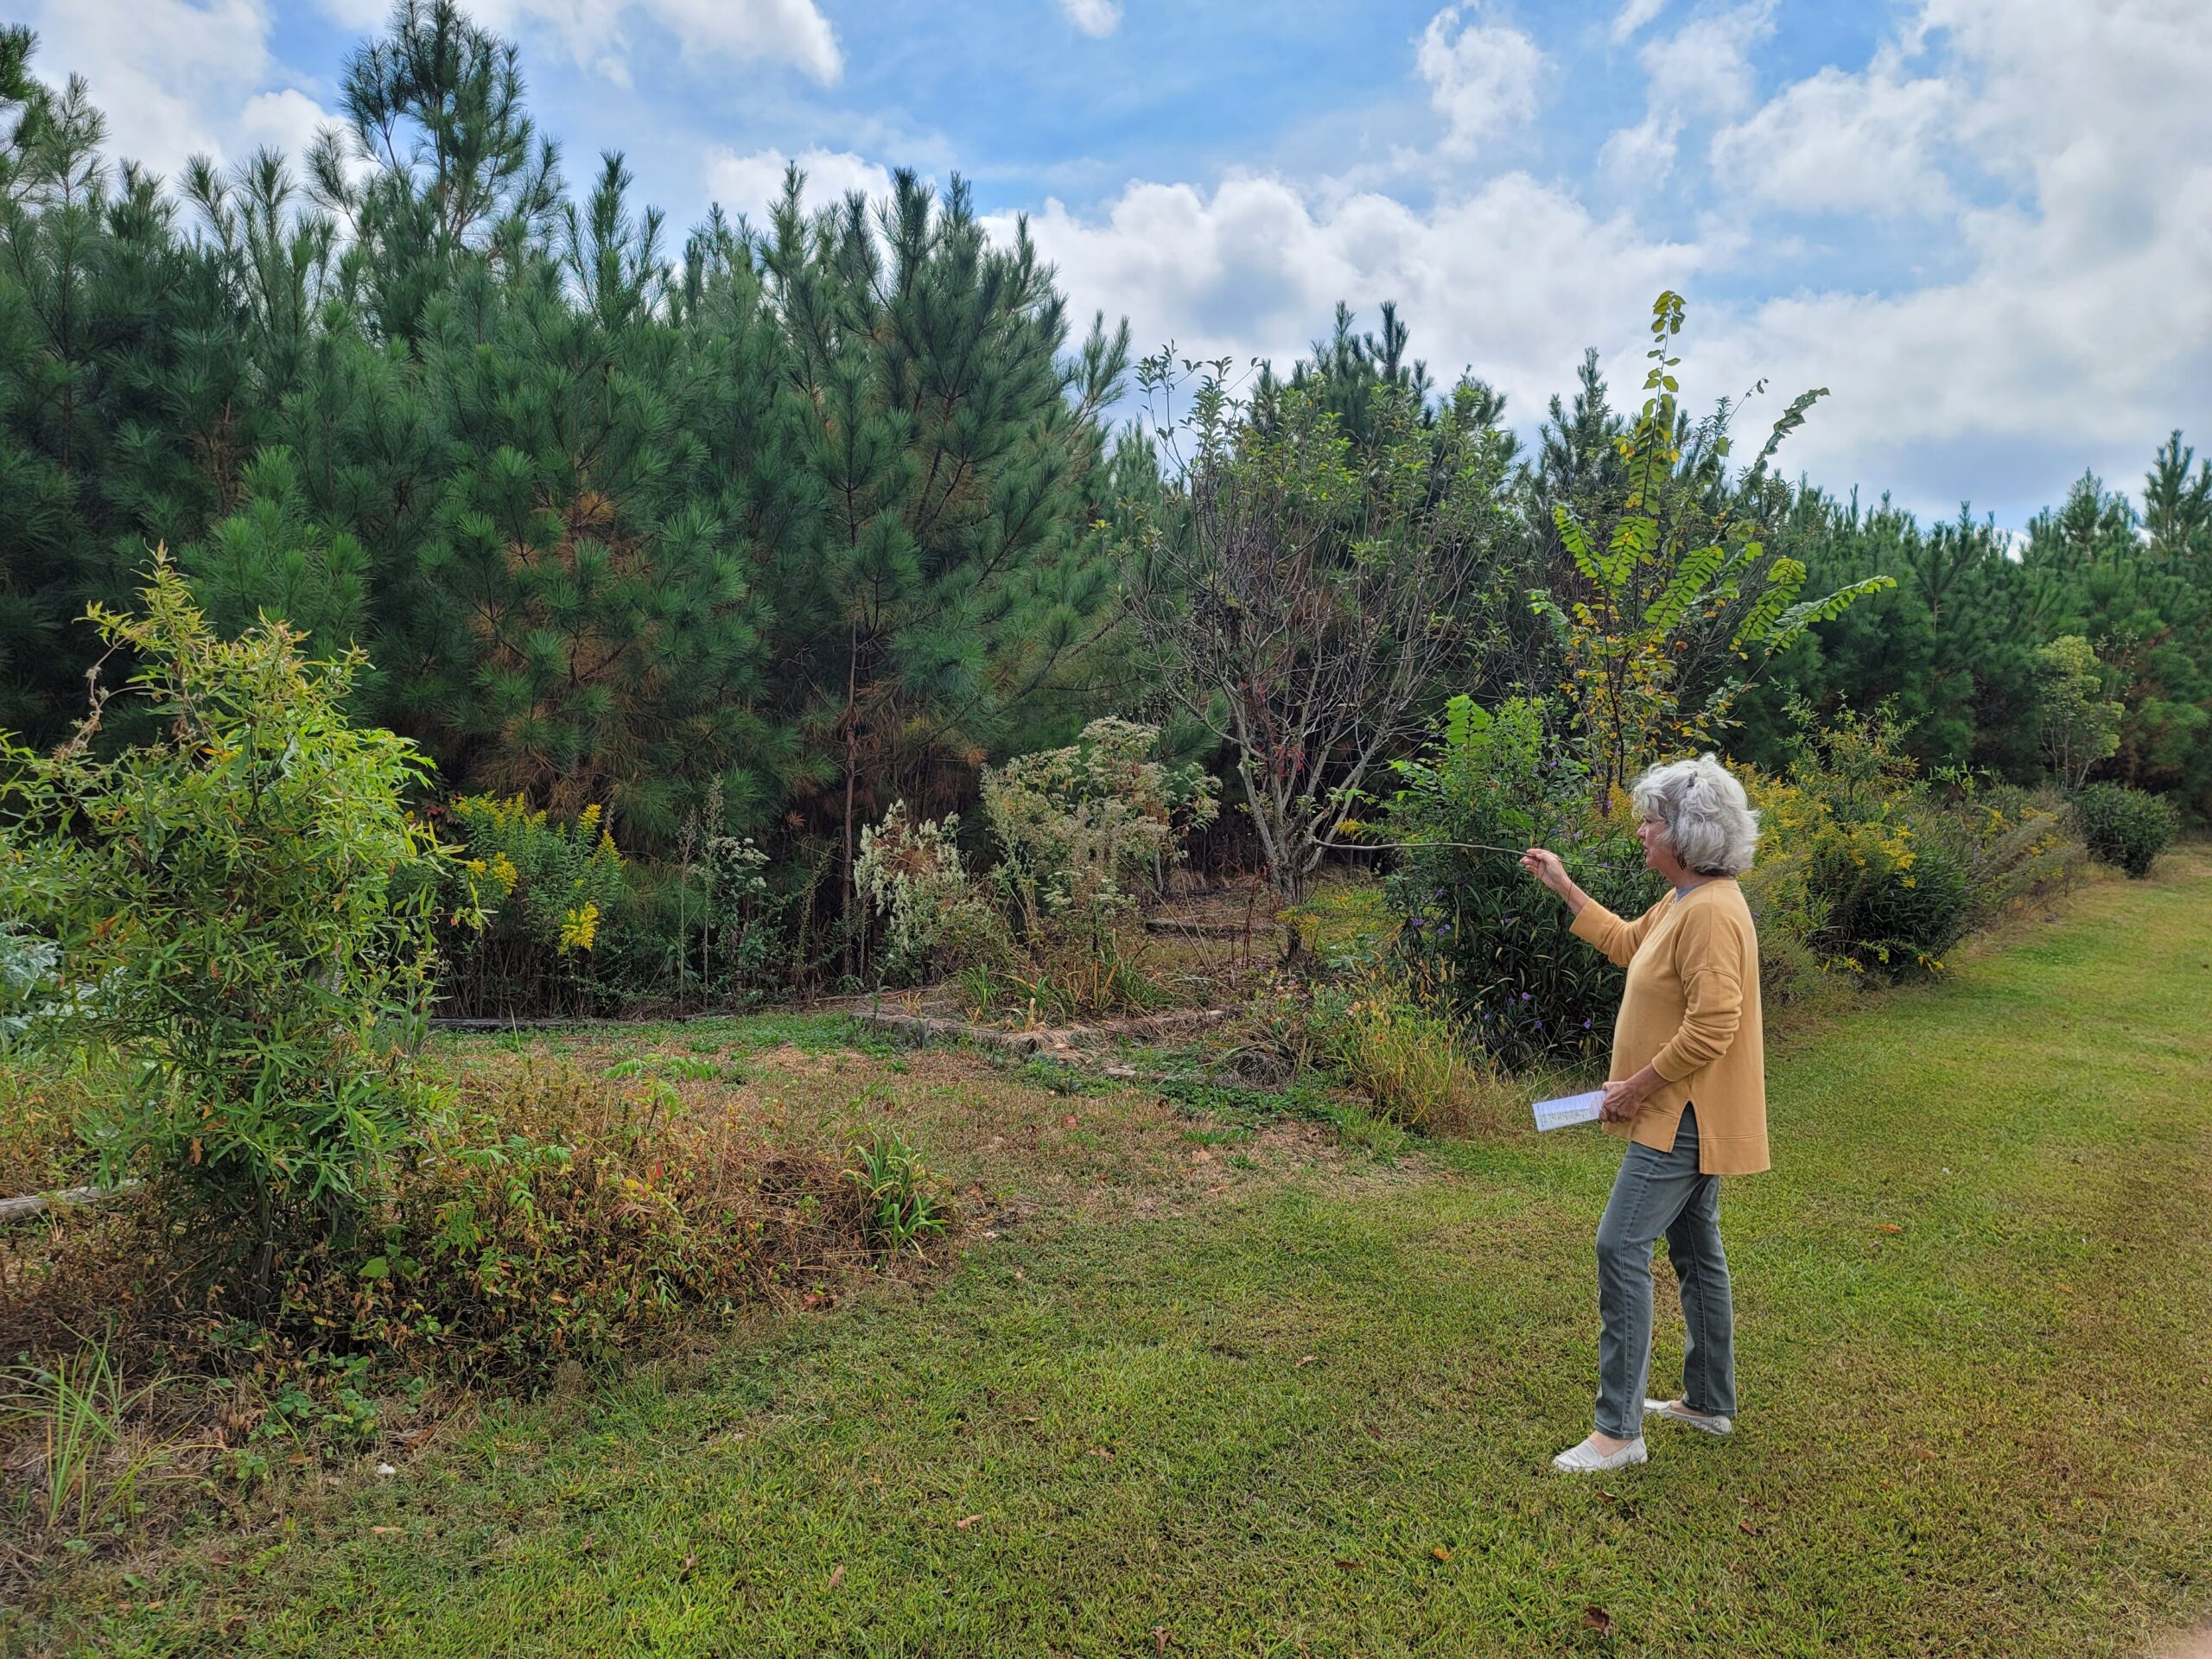 A woman in a peach colored top gestures with a thin long stick, pointing at a variety of trees and shrubs.